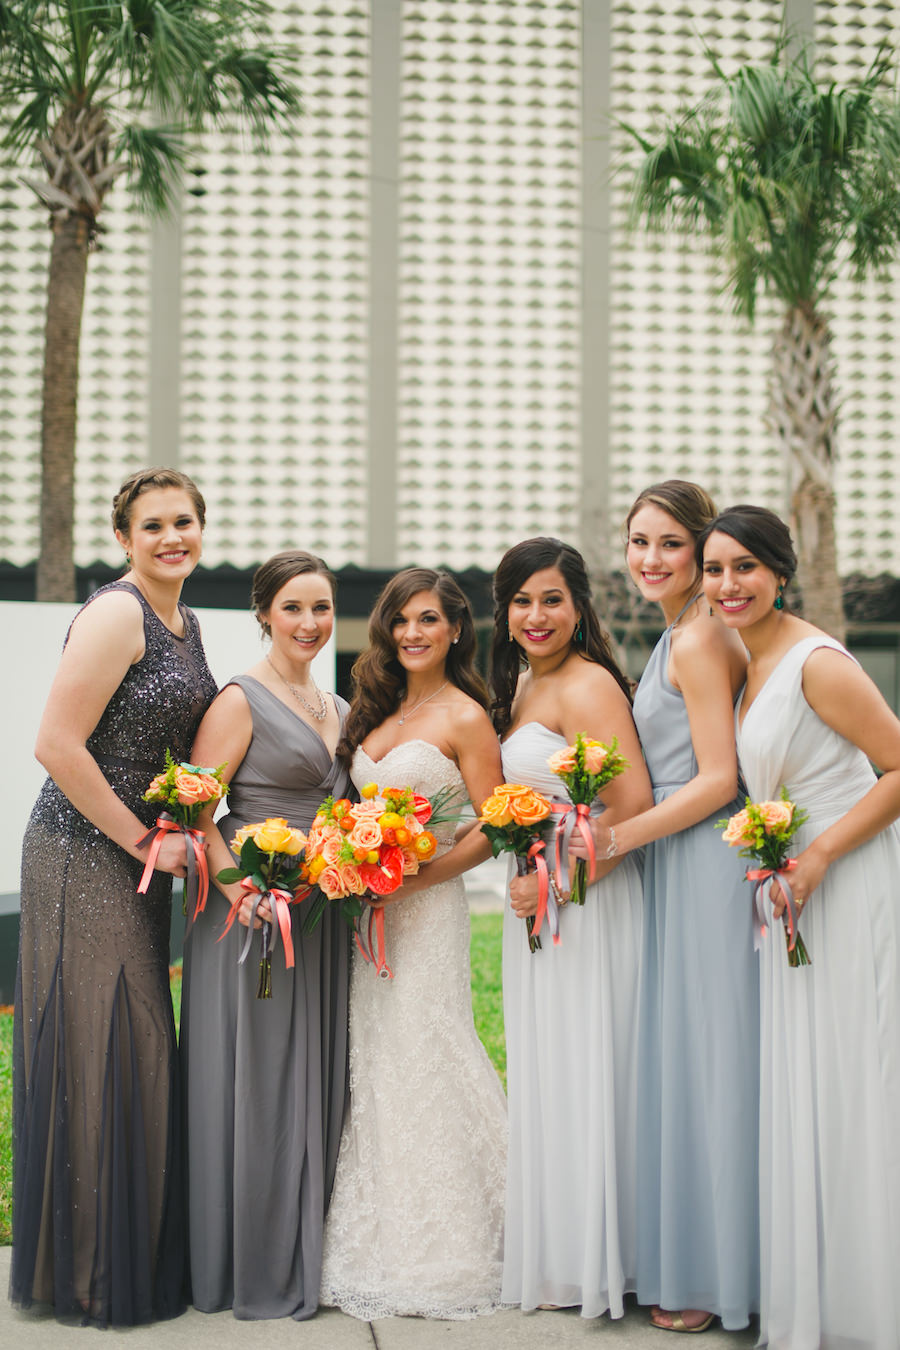 Bridal Party Wedding Portrait with Mismatched Grey Bridesmaids Dresses and Strapless Beaded Lace Wedding Dress from Isabel O’Neil Bridal Collection | Photography by Roohi Photography | Tampa Wedding Hair and Makeup by Lasting Luxe